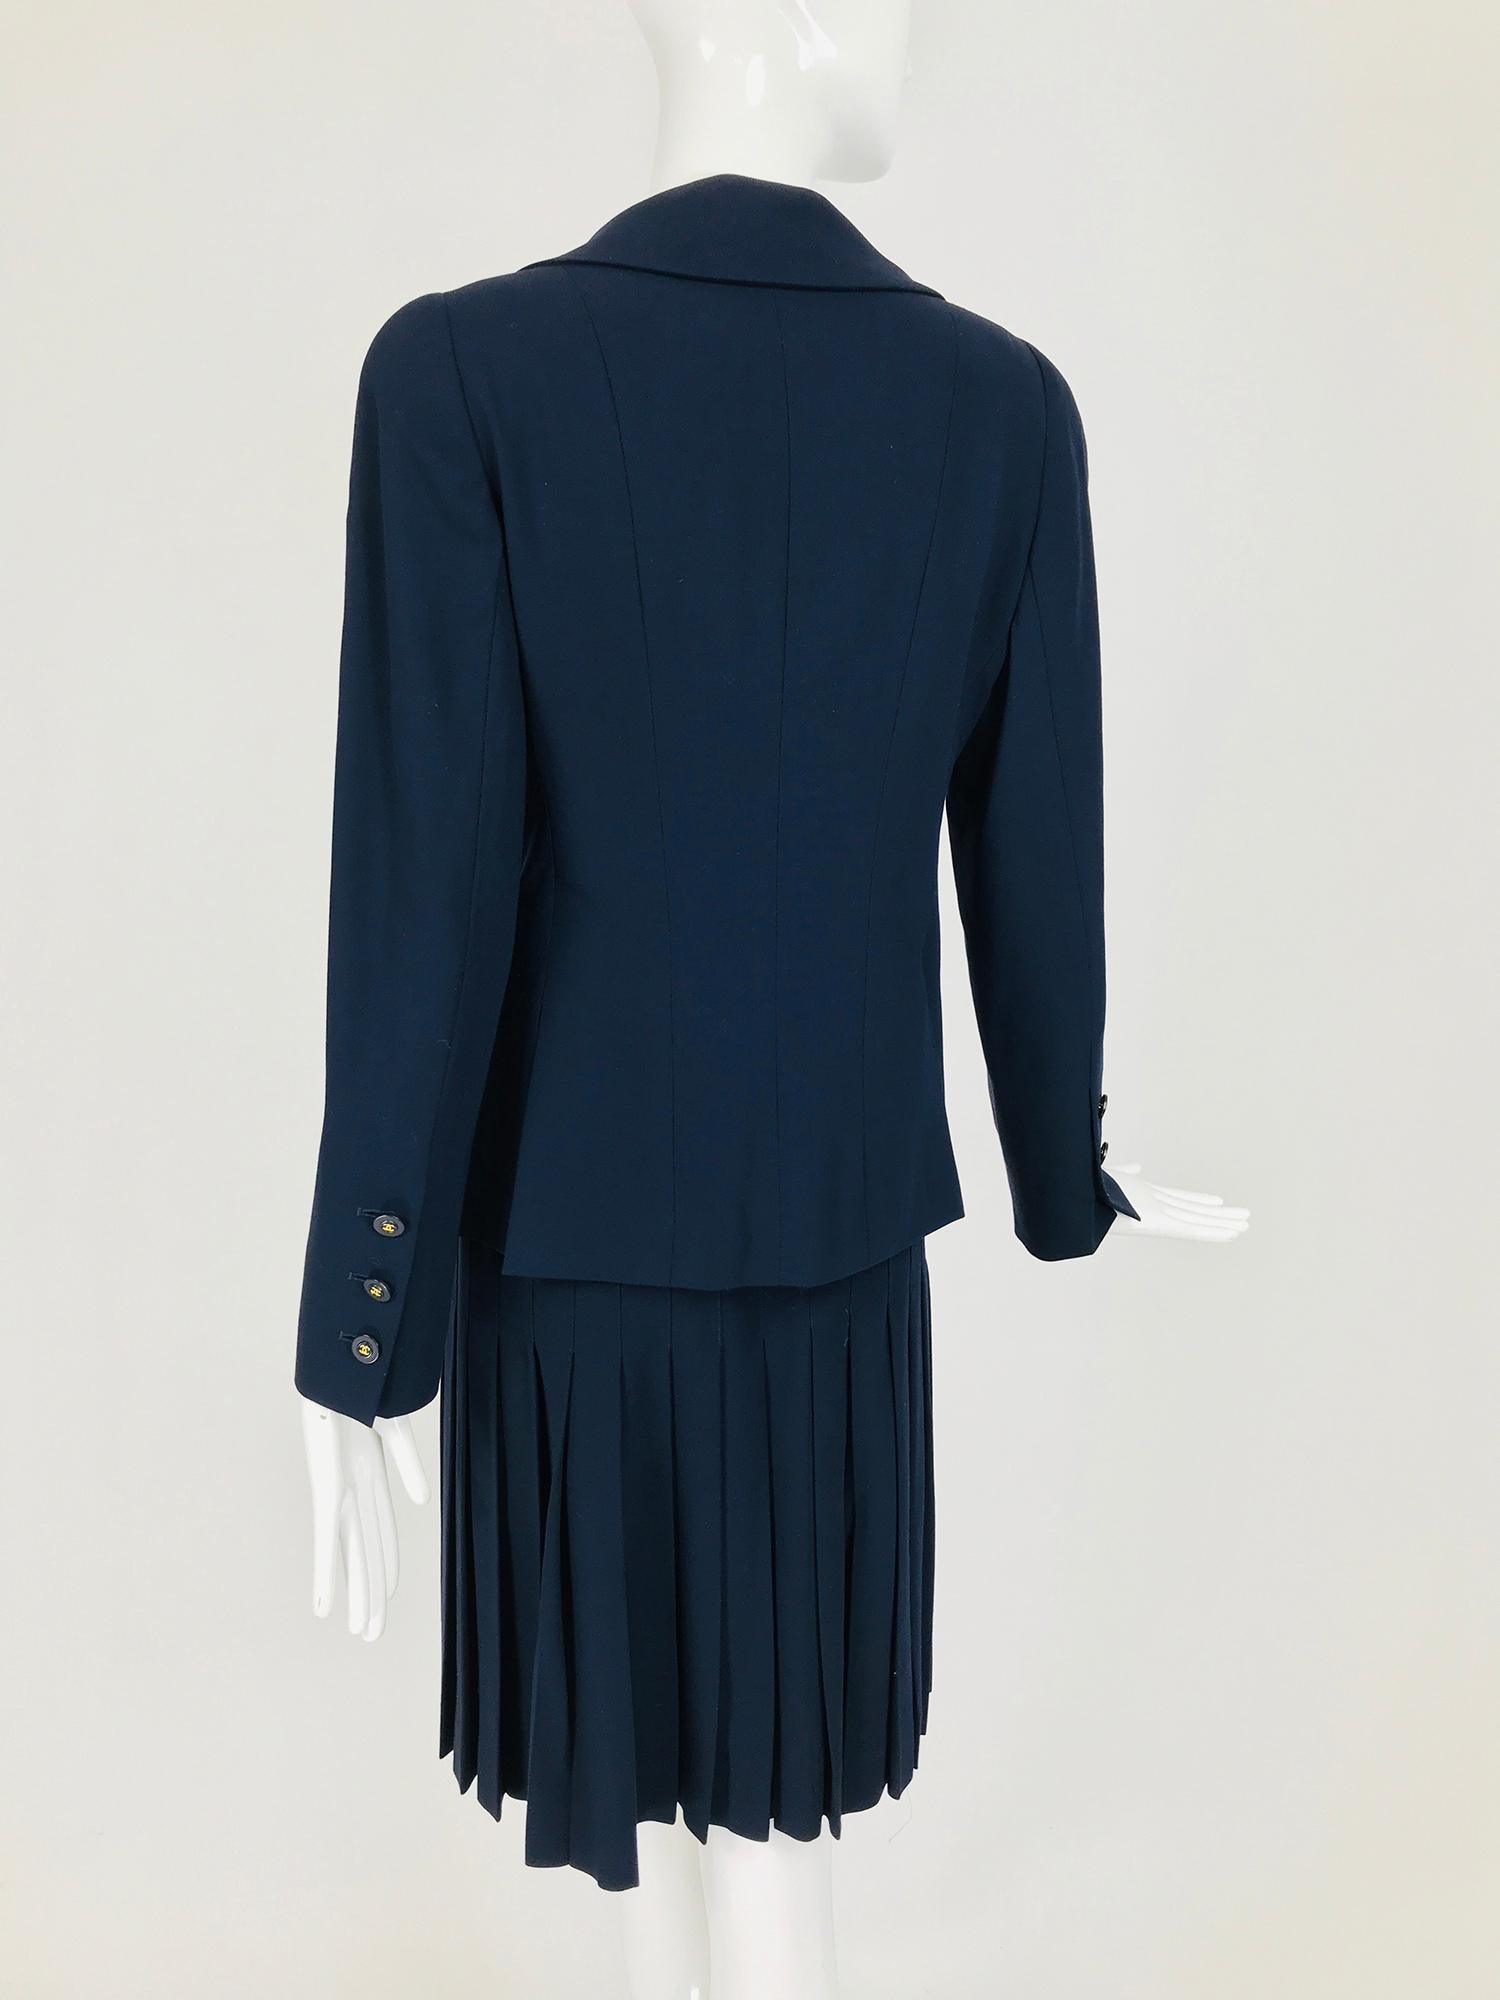 Chanel Navy Blue Double Breasted Jacket and Pleated skirt 1994P 1